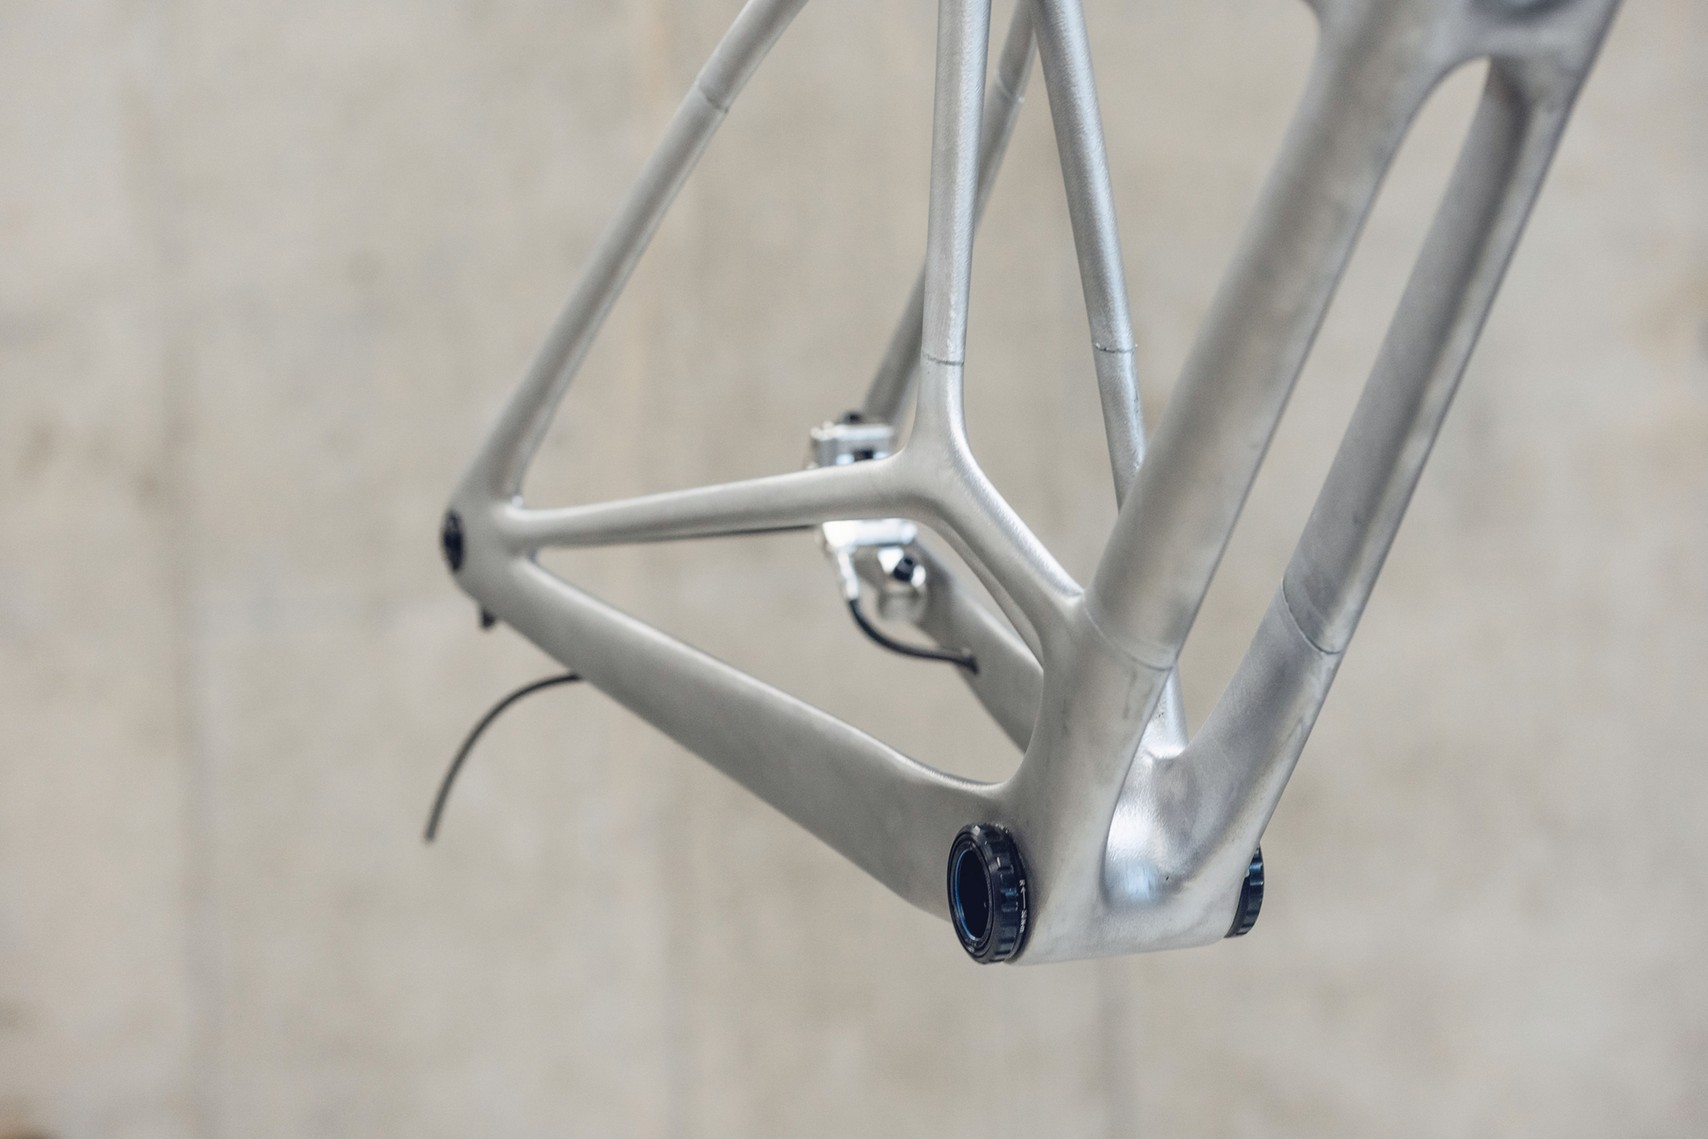 The bicycle frame was 3D printed in three parts and glued together. Photo via Bike Magazine.